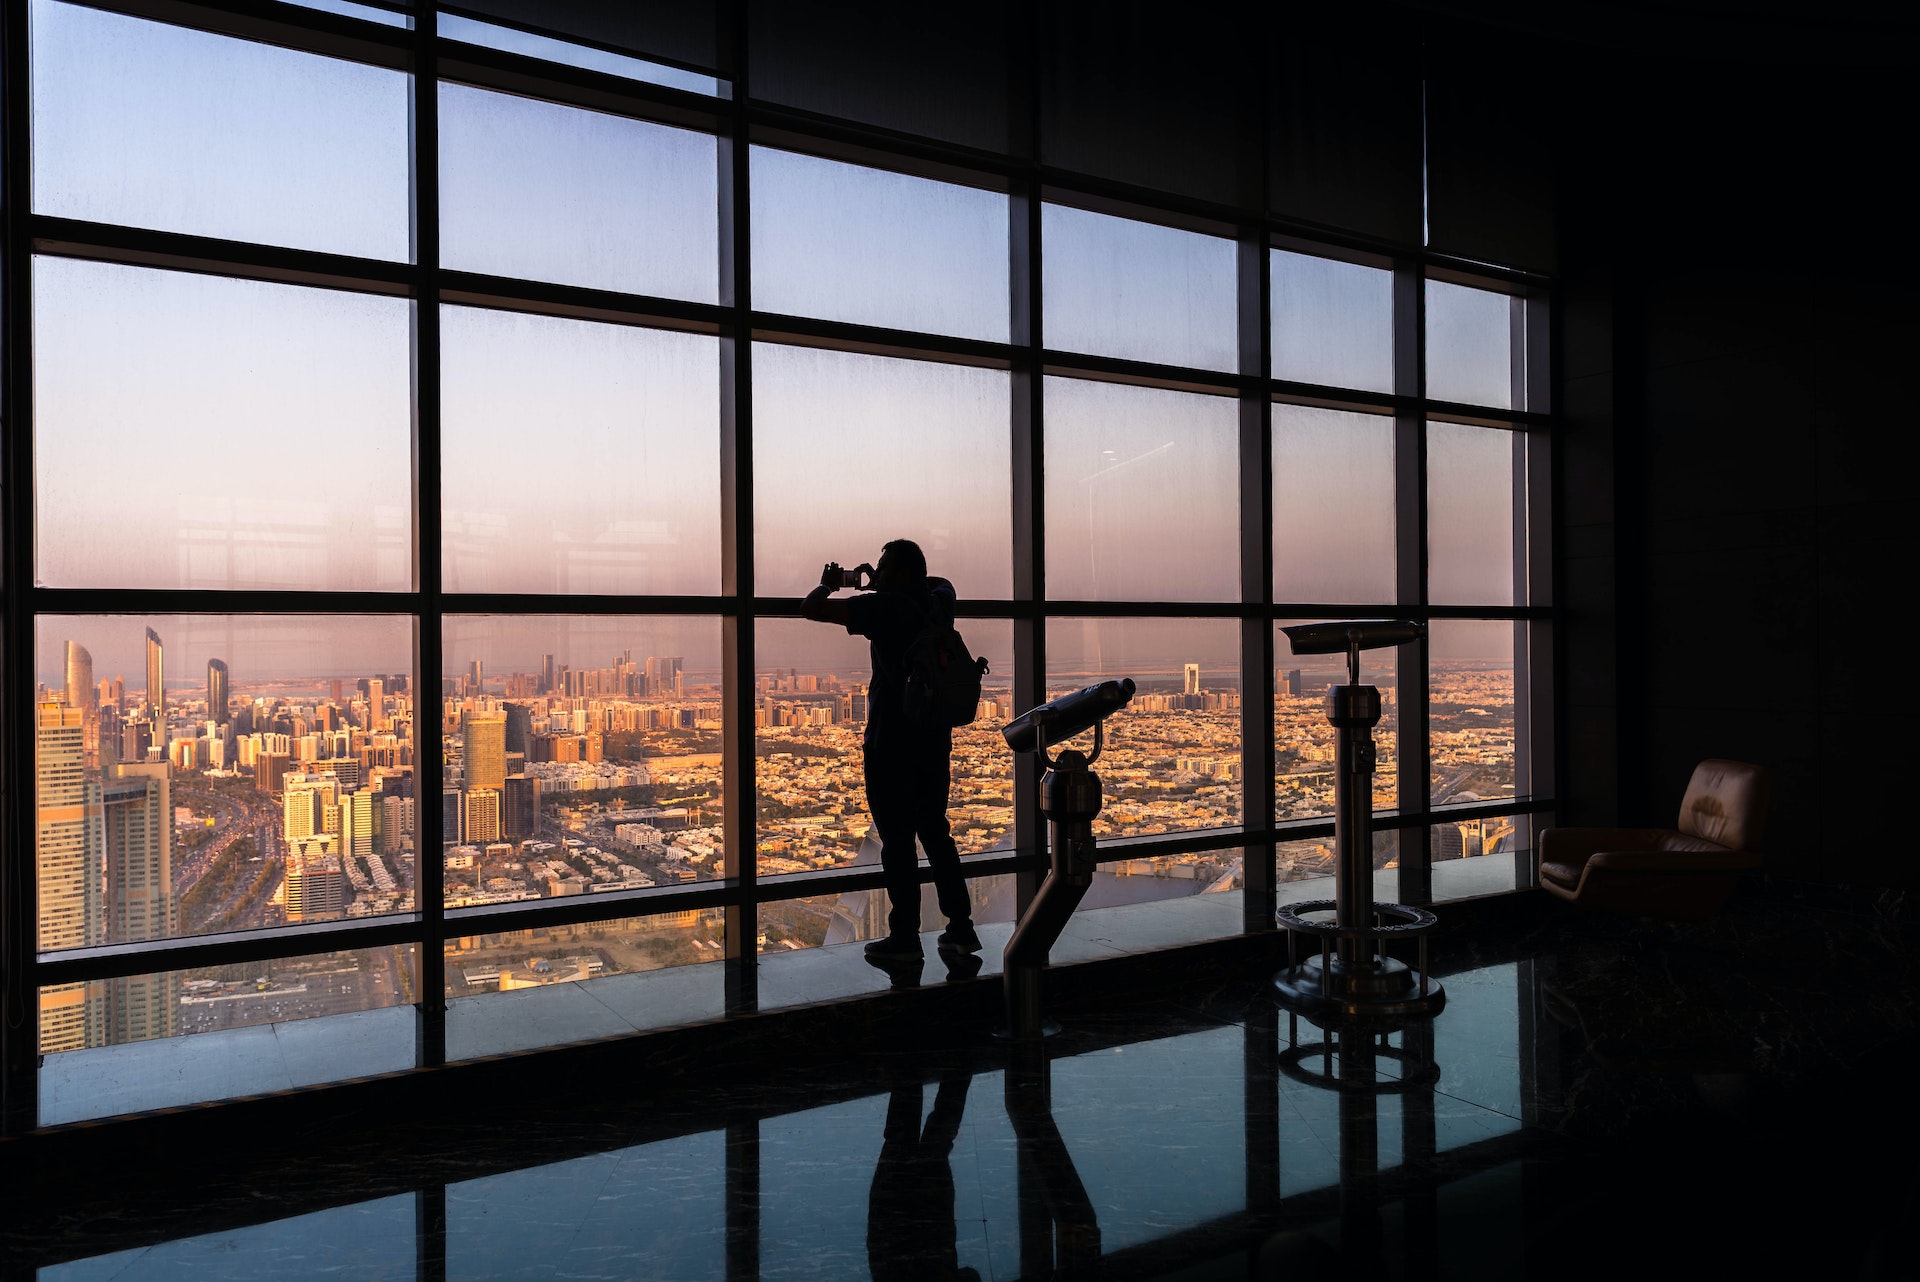 Silhouette of tourist taking picture with smartphone from Observation Deck at 300, Etihad towers